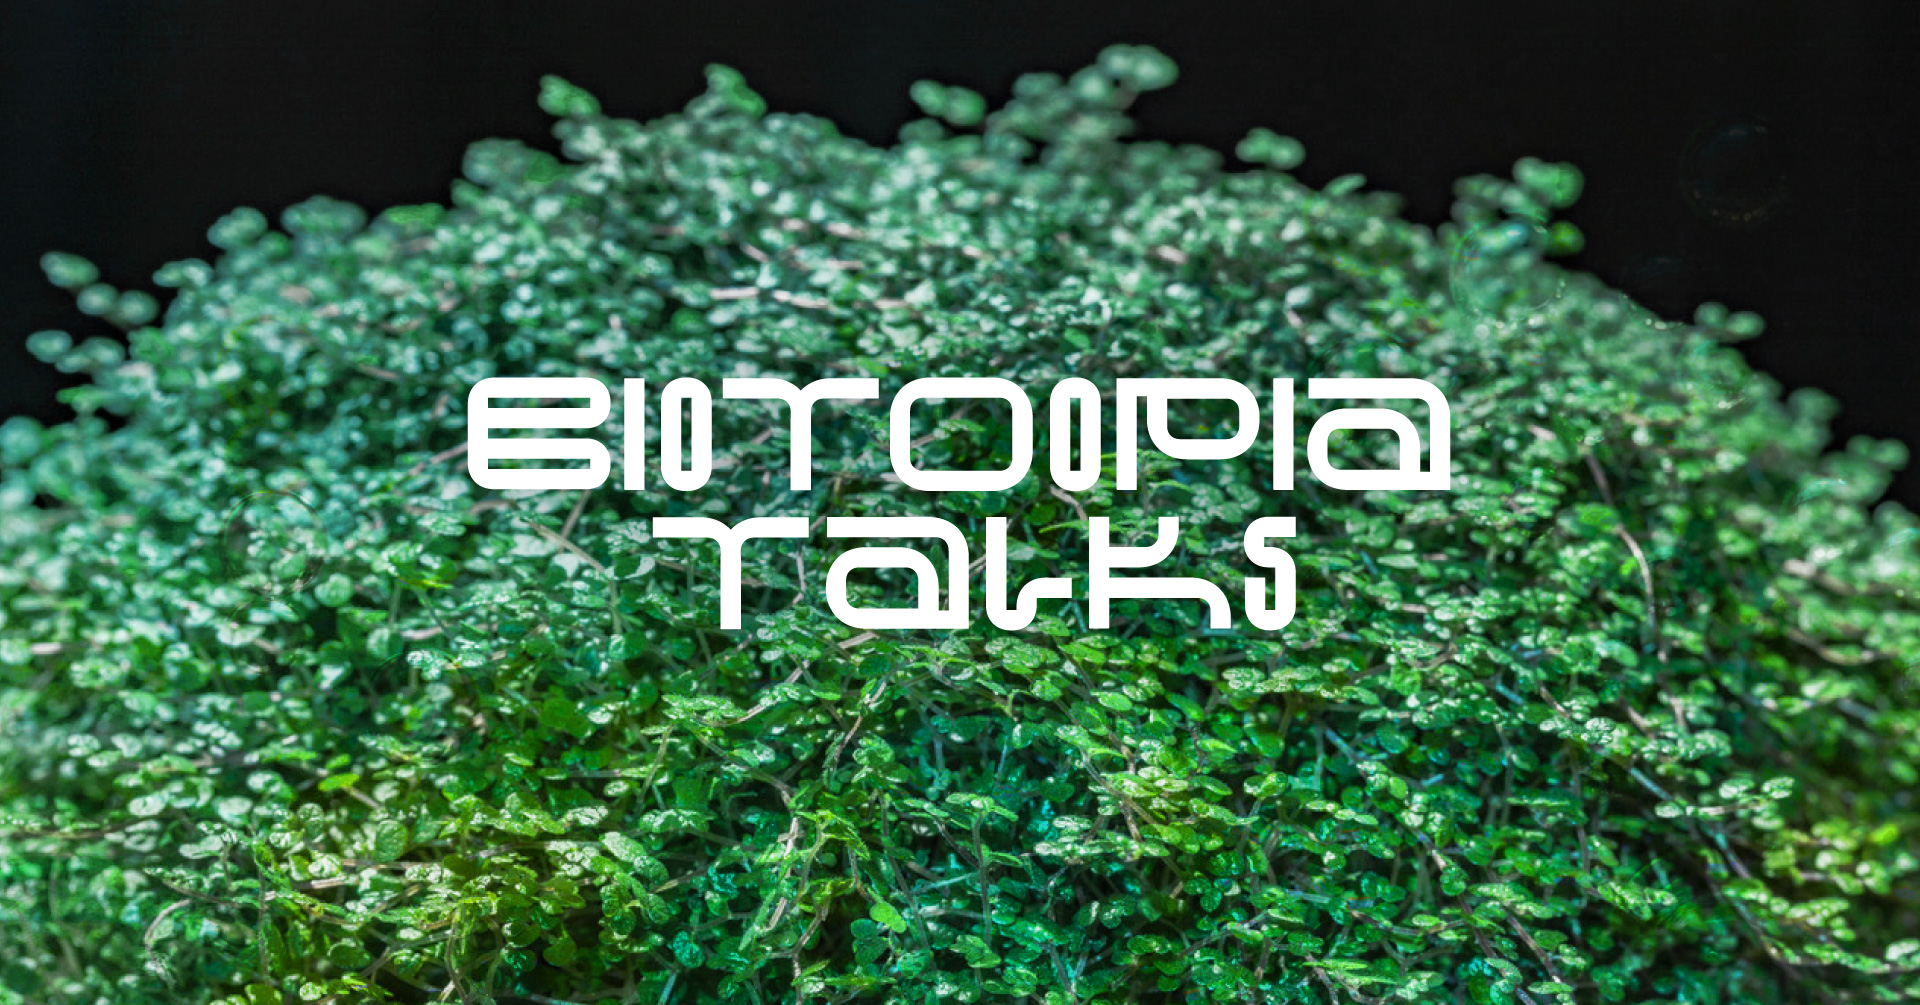 Biotoopia’s new Talks series will bring together young people and experts to discuss solutions to the environmental crisis